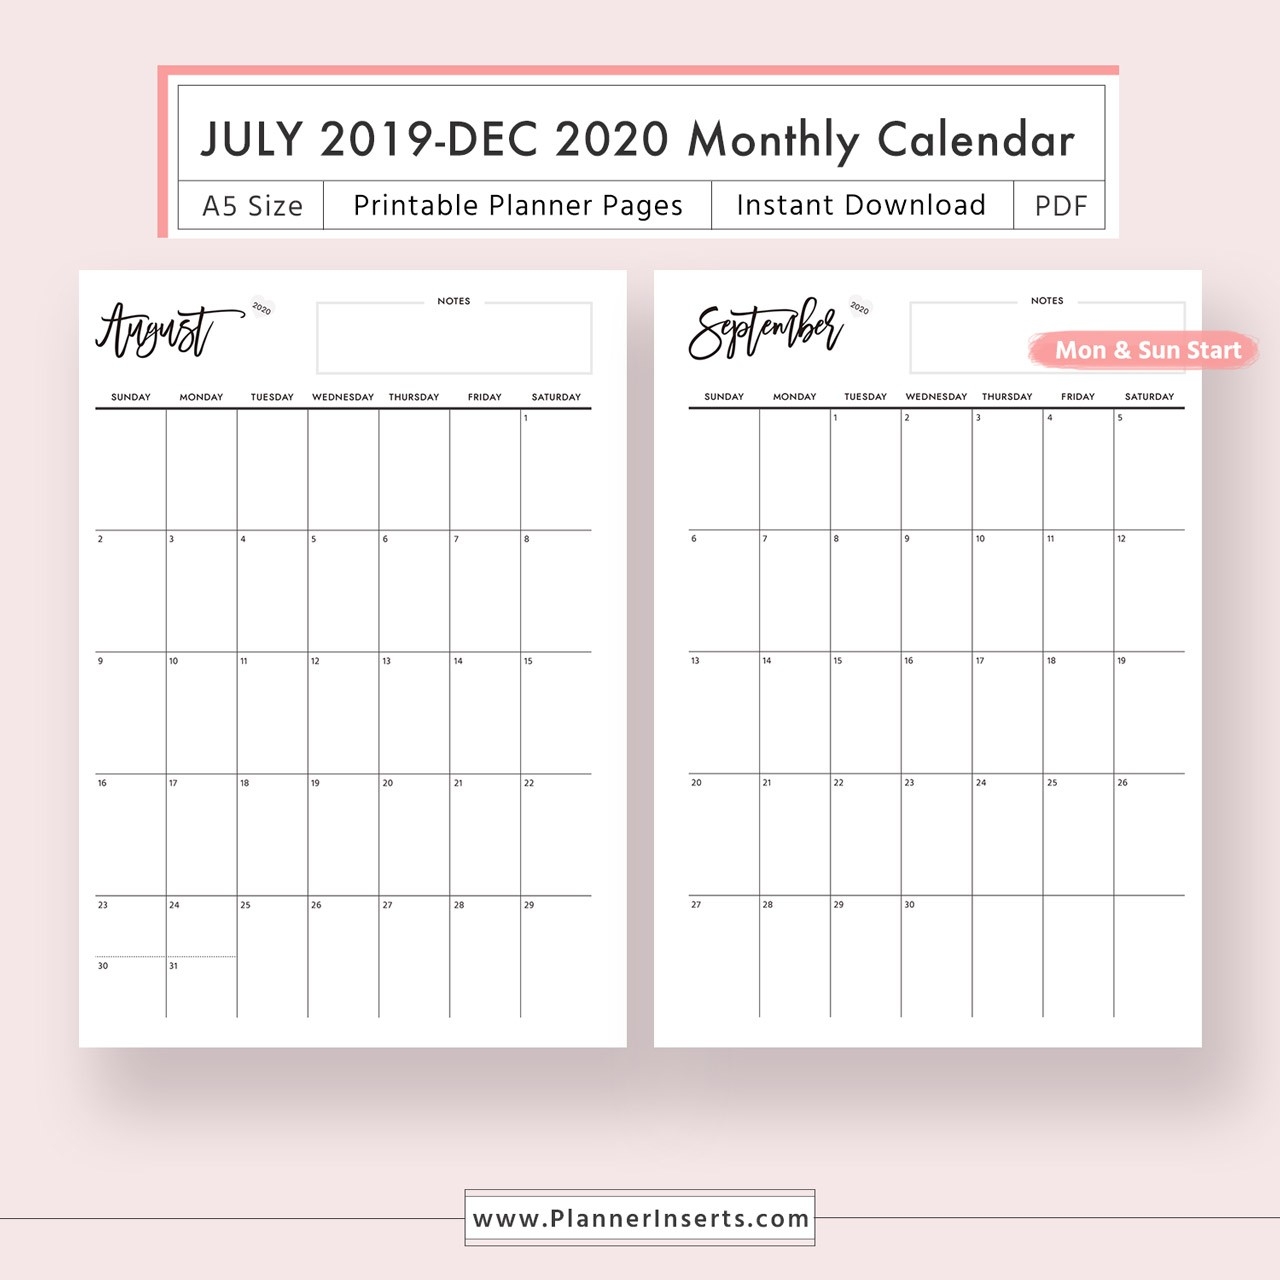 Printable Planner Calendar 2020 - Wpa.wpart.co-Free Printable Two Page Monthly Calendar 2020